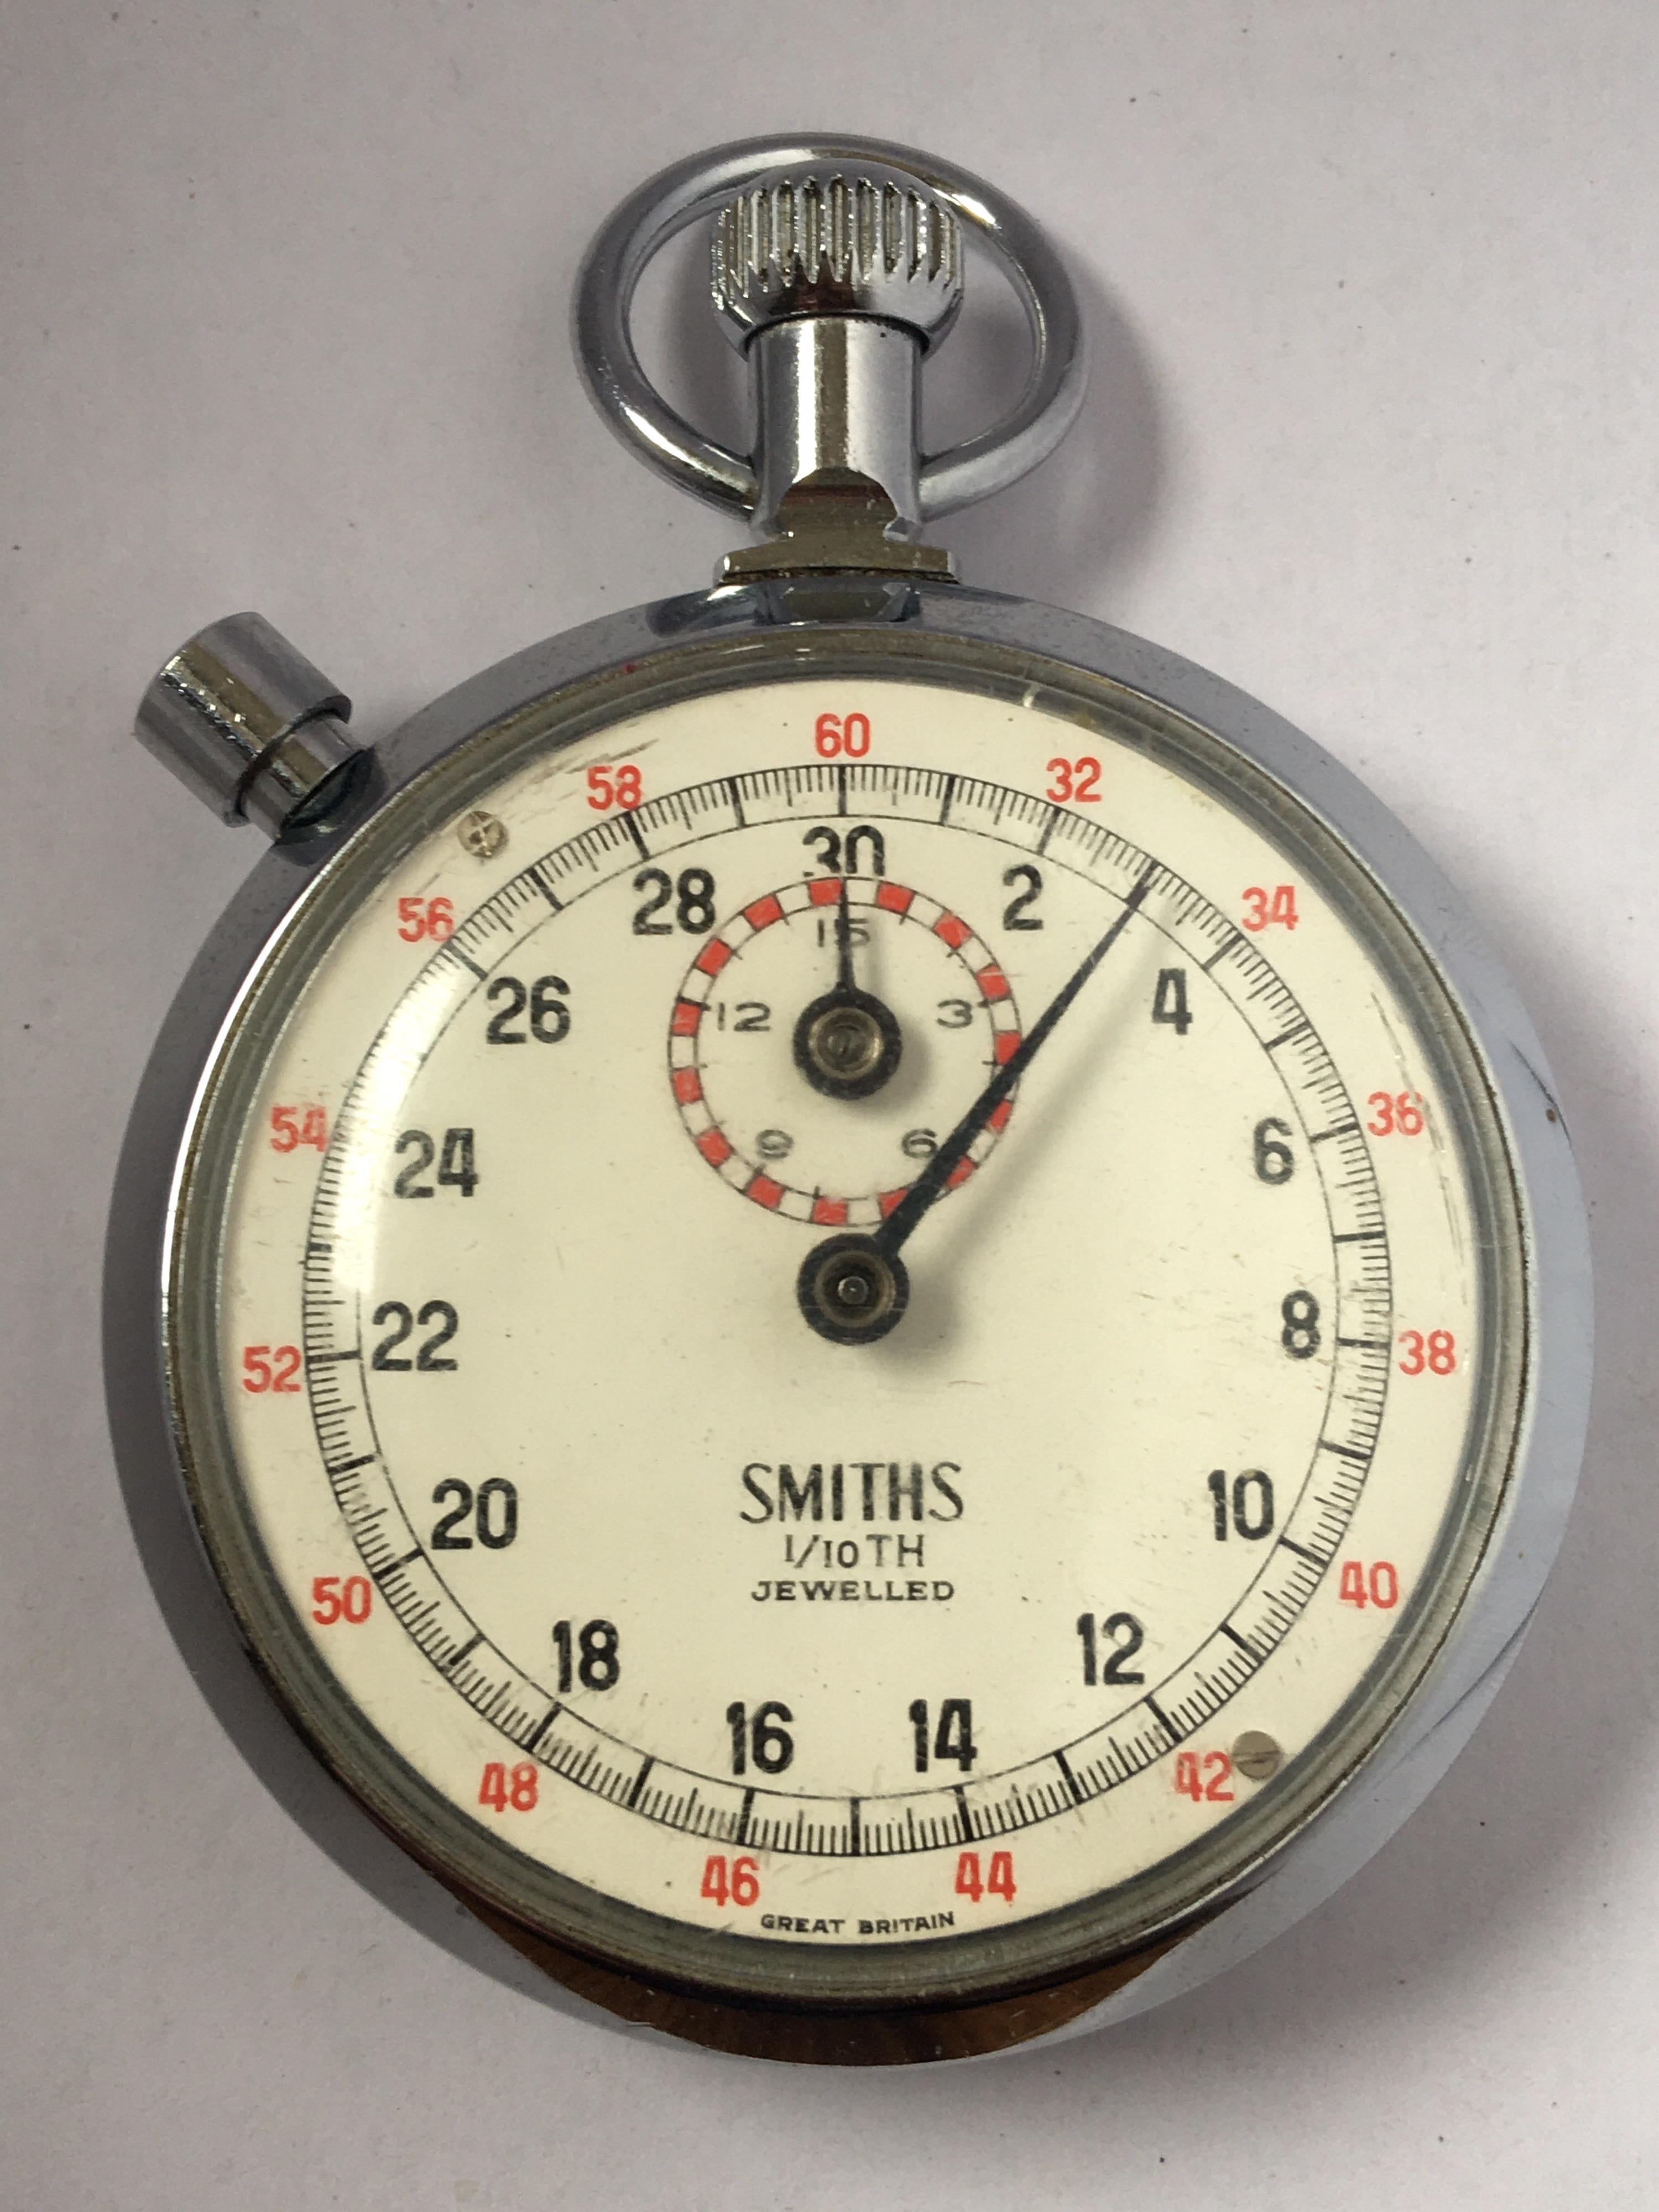 Smiths Sport Timer 1/10 TH Jewelled Stop Watch Handheld Fitness Sports For Sale 5